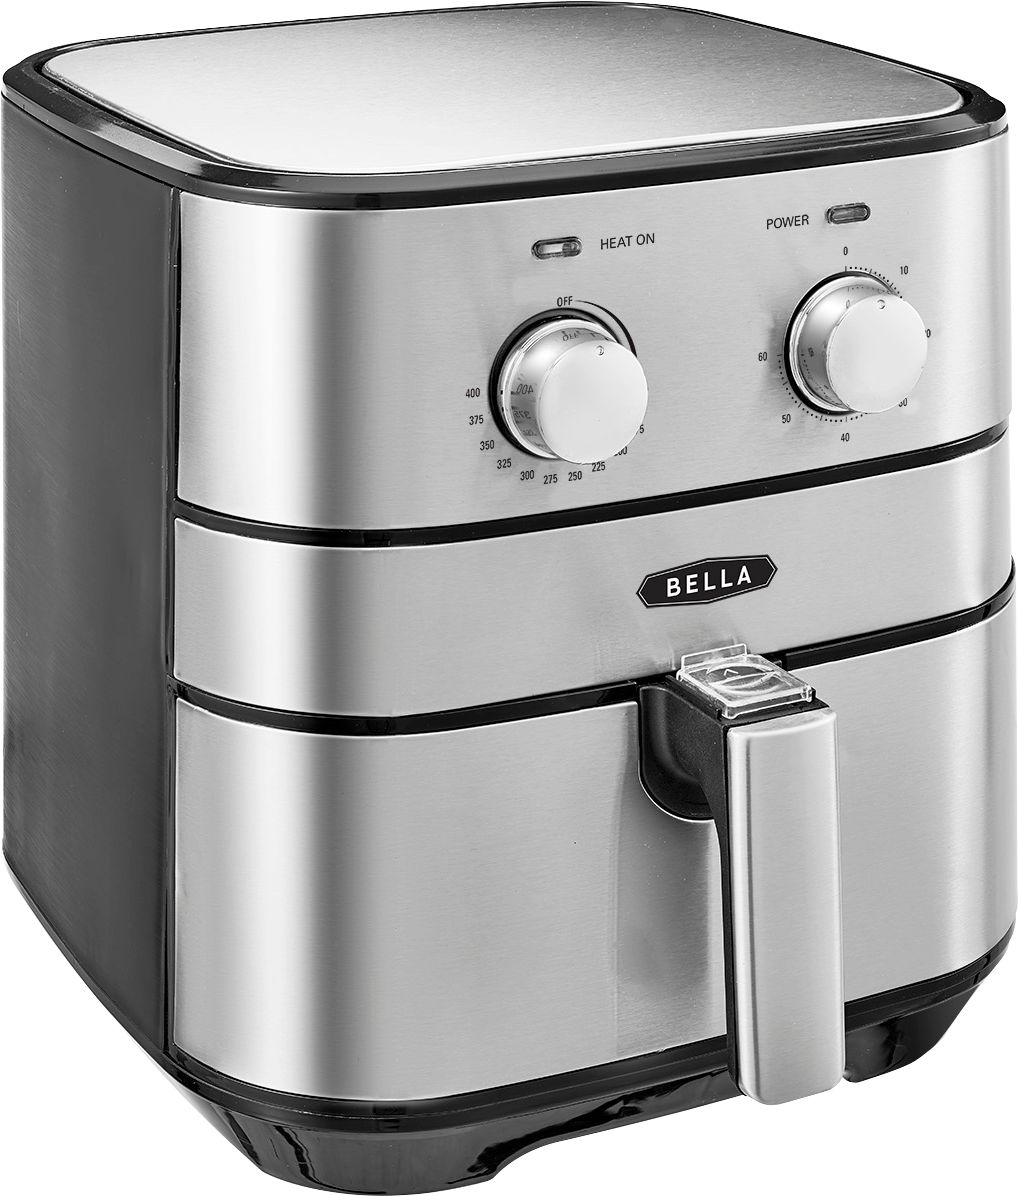 Angle View: Bella - 5.3-qt. Analog Air Convection Fryer - Stainless Steel